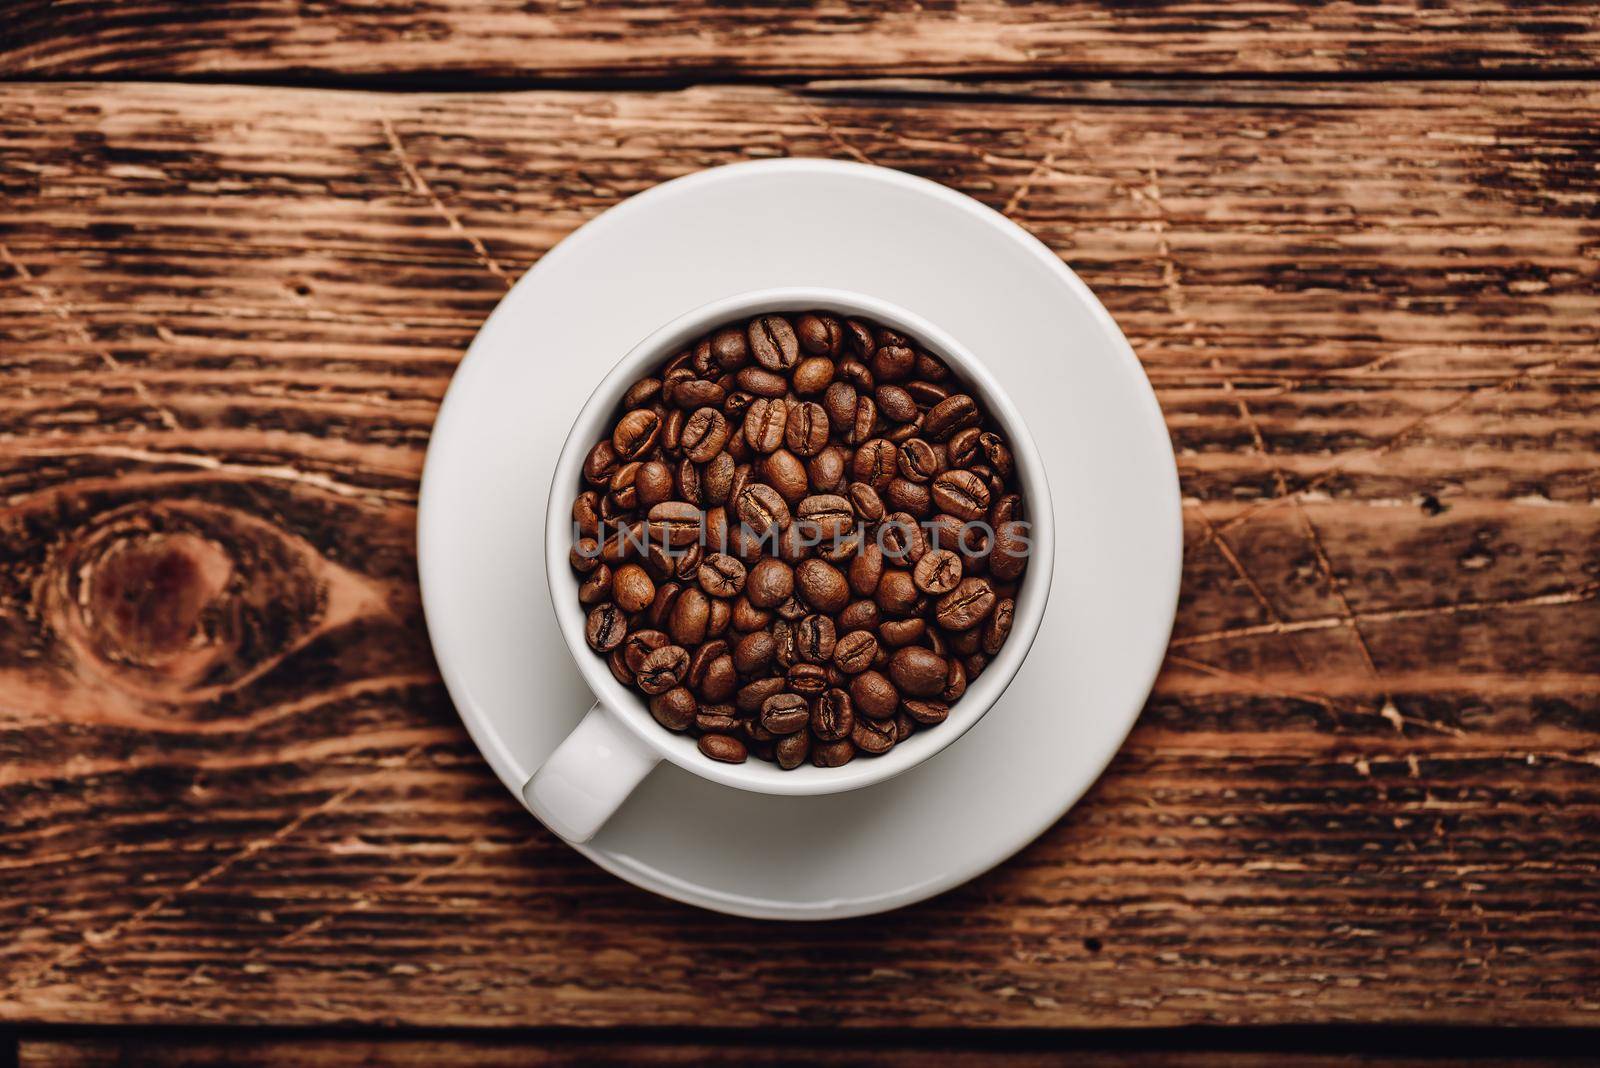 Roasted coffee beans in cup over wooden surface